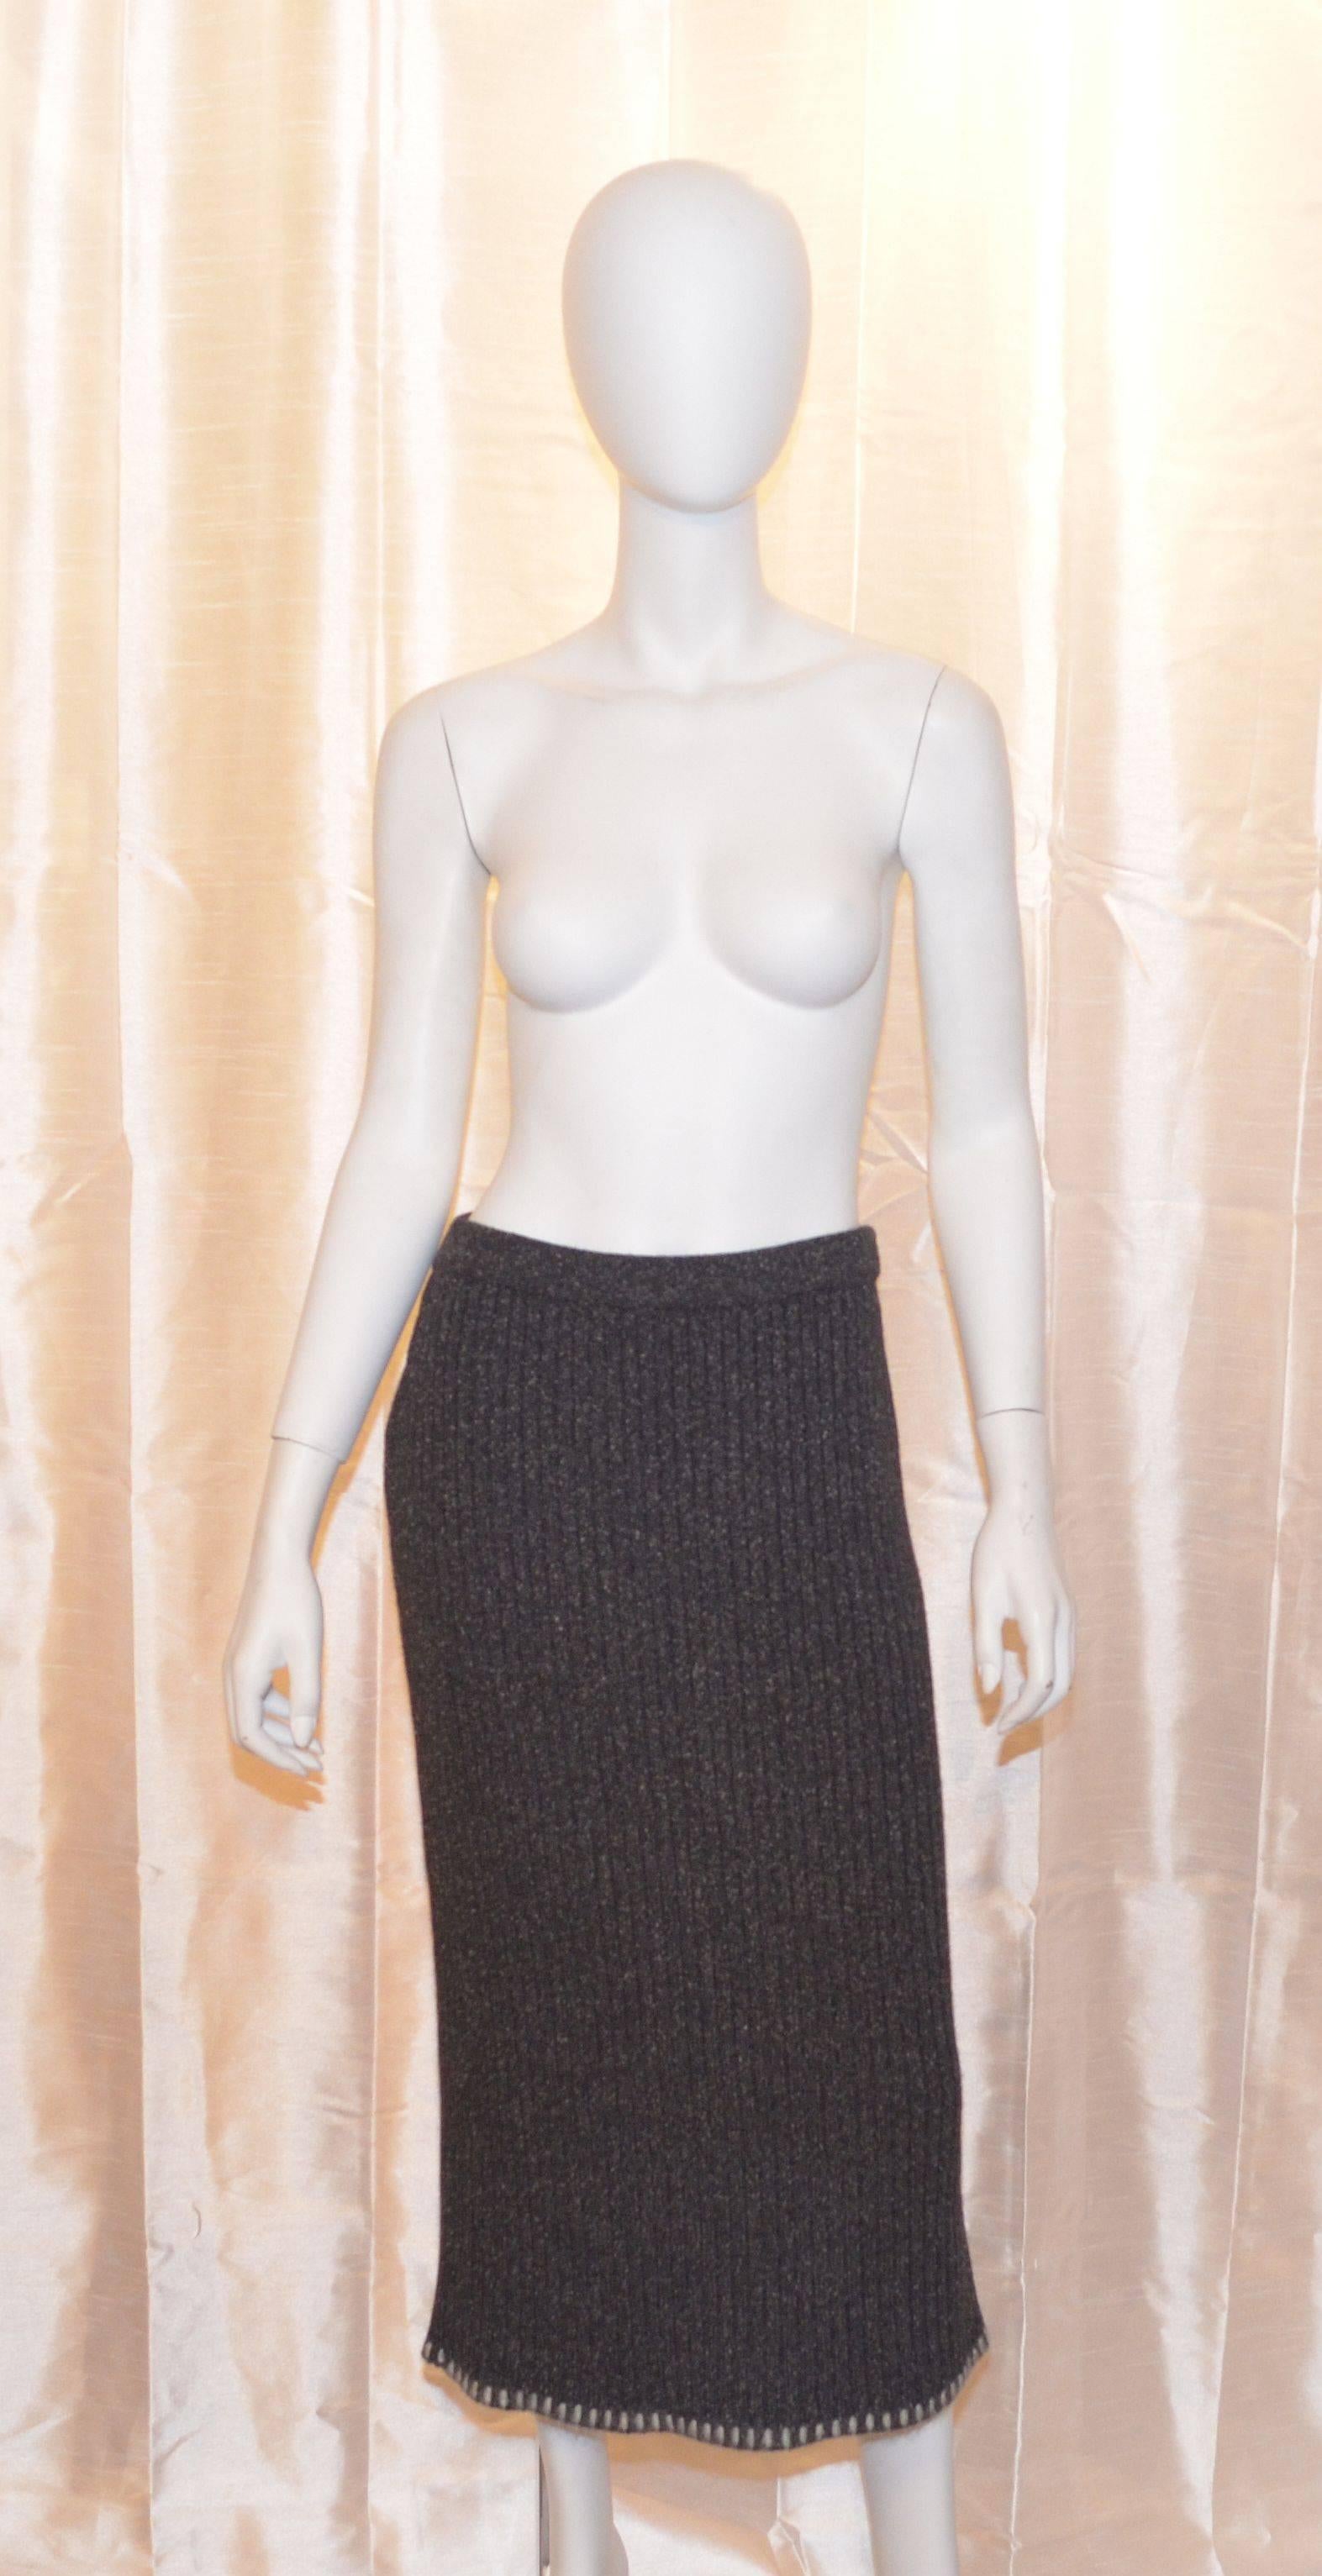 Christian Dior mohair, angora, silk blend knit set is made with 35% nylon, 25% mohair, 20% wool, 15% silk, and 5% angora. Turtleneck and skirt are stretchy and ribbed. Skirt has an elasticized waistband. Size L, made in Italy.

Measurements: